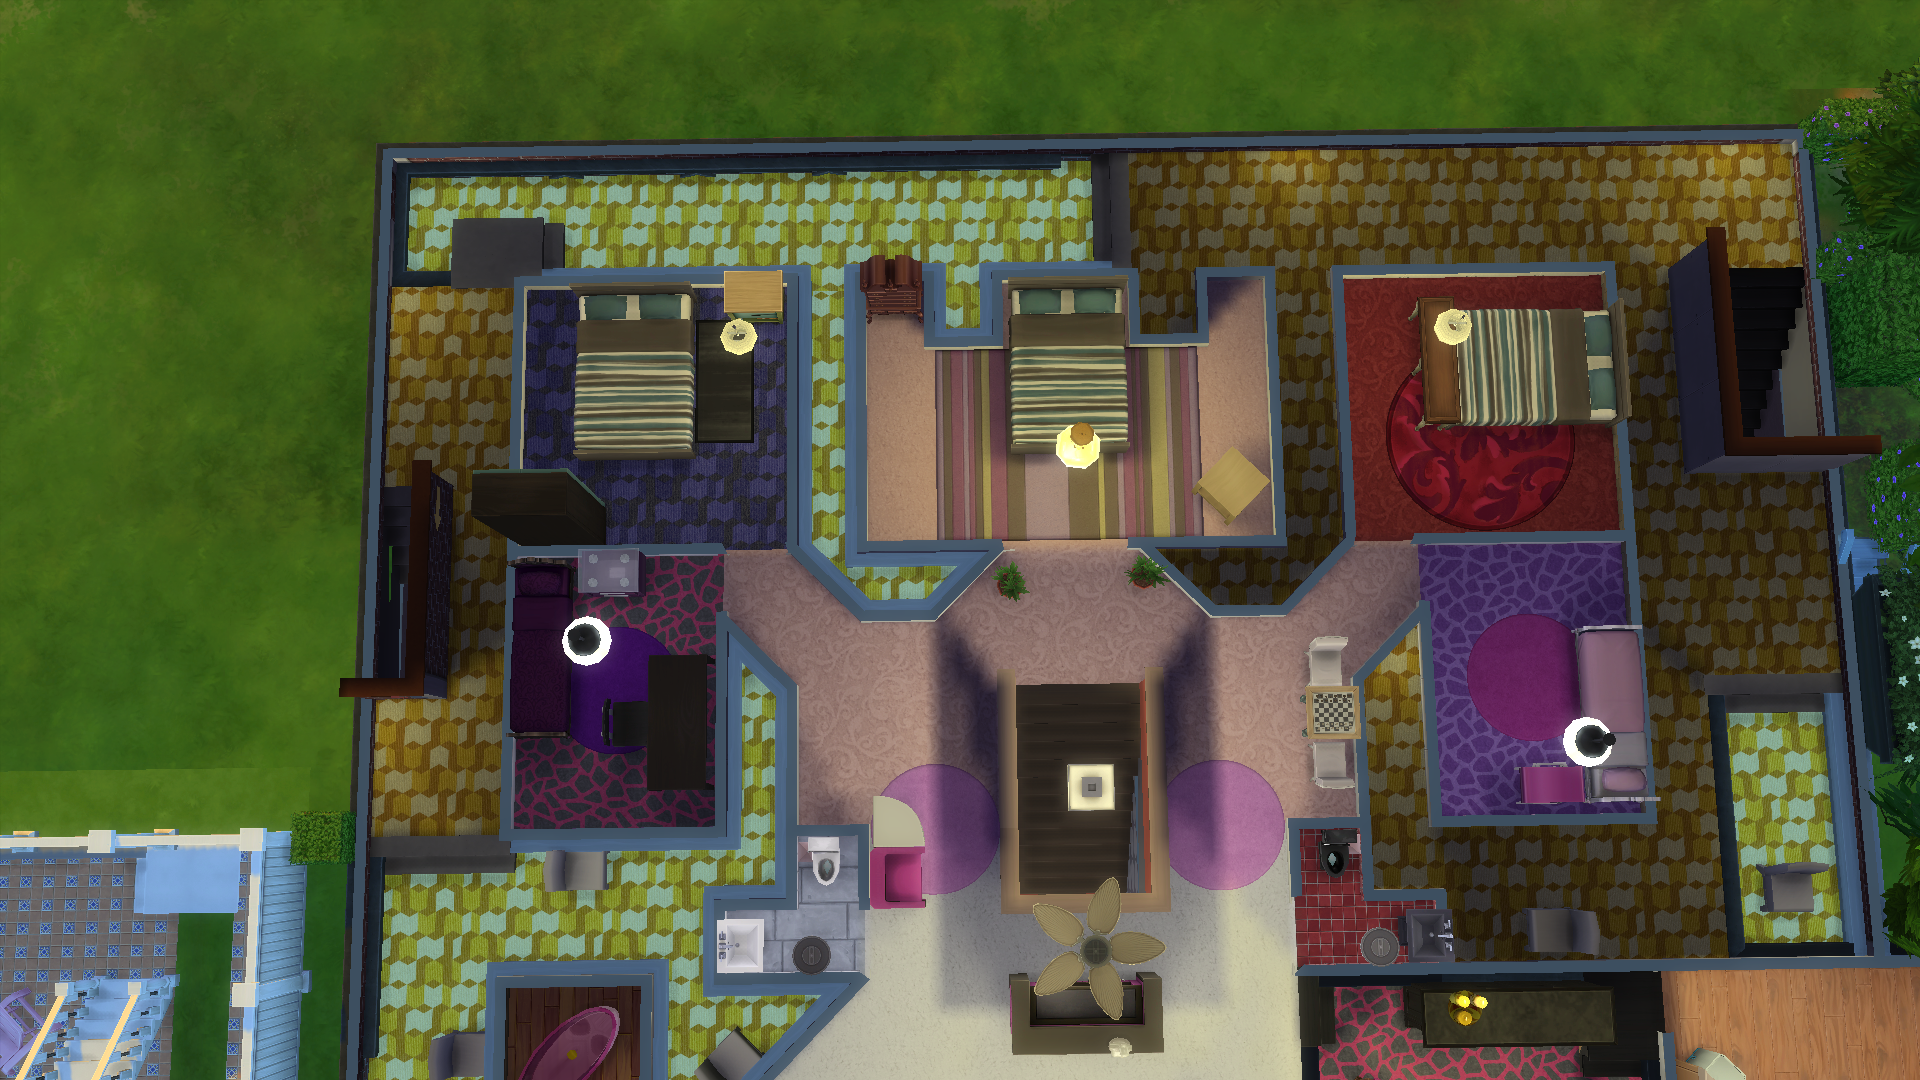 Voyeur Dorm or Big Brother XXX - Downloads - The Sims 4 image